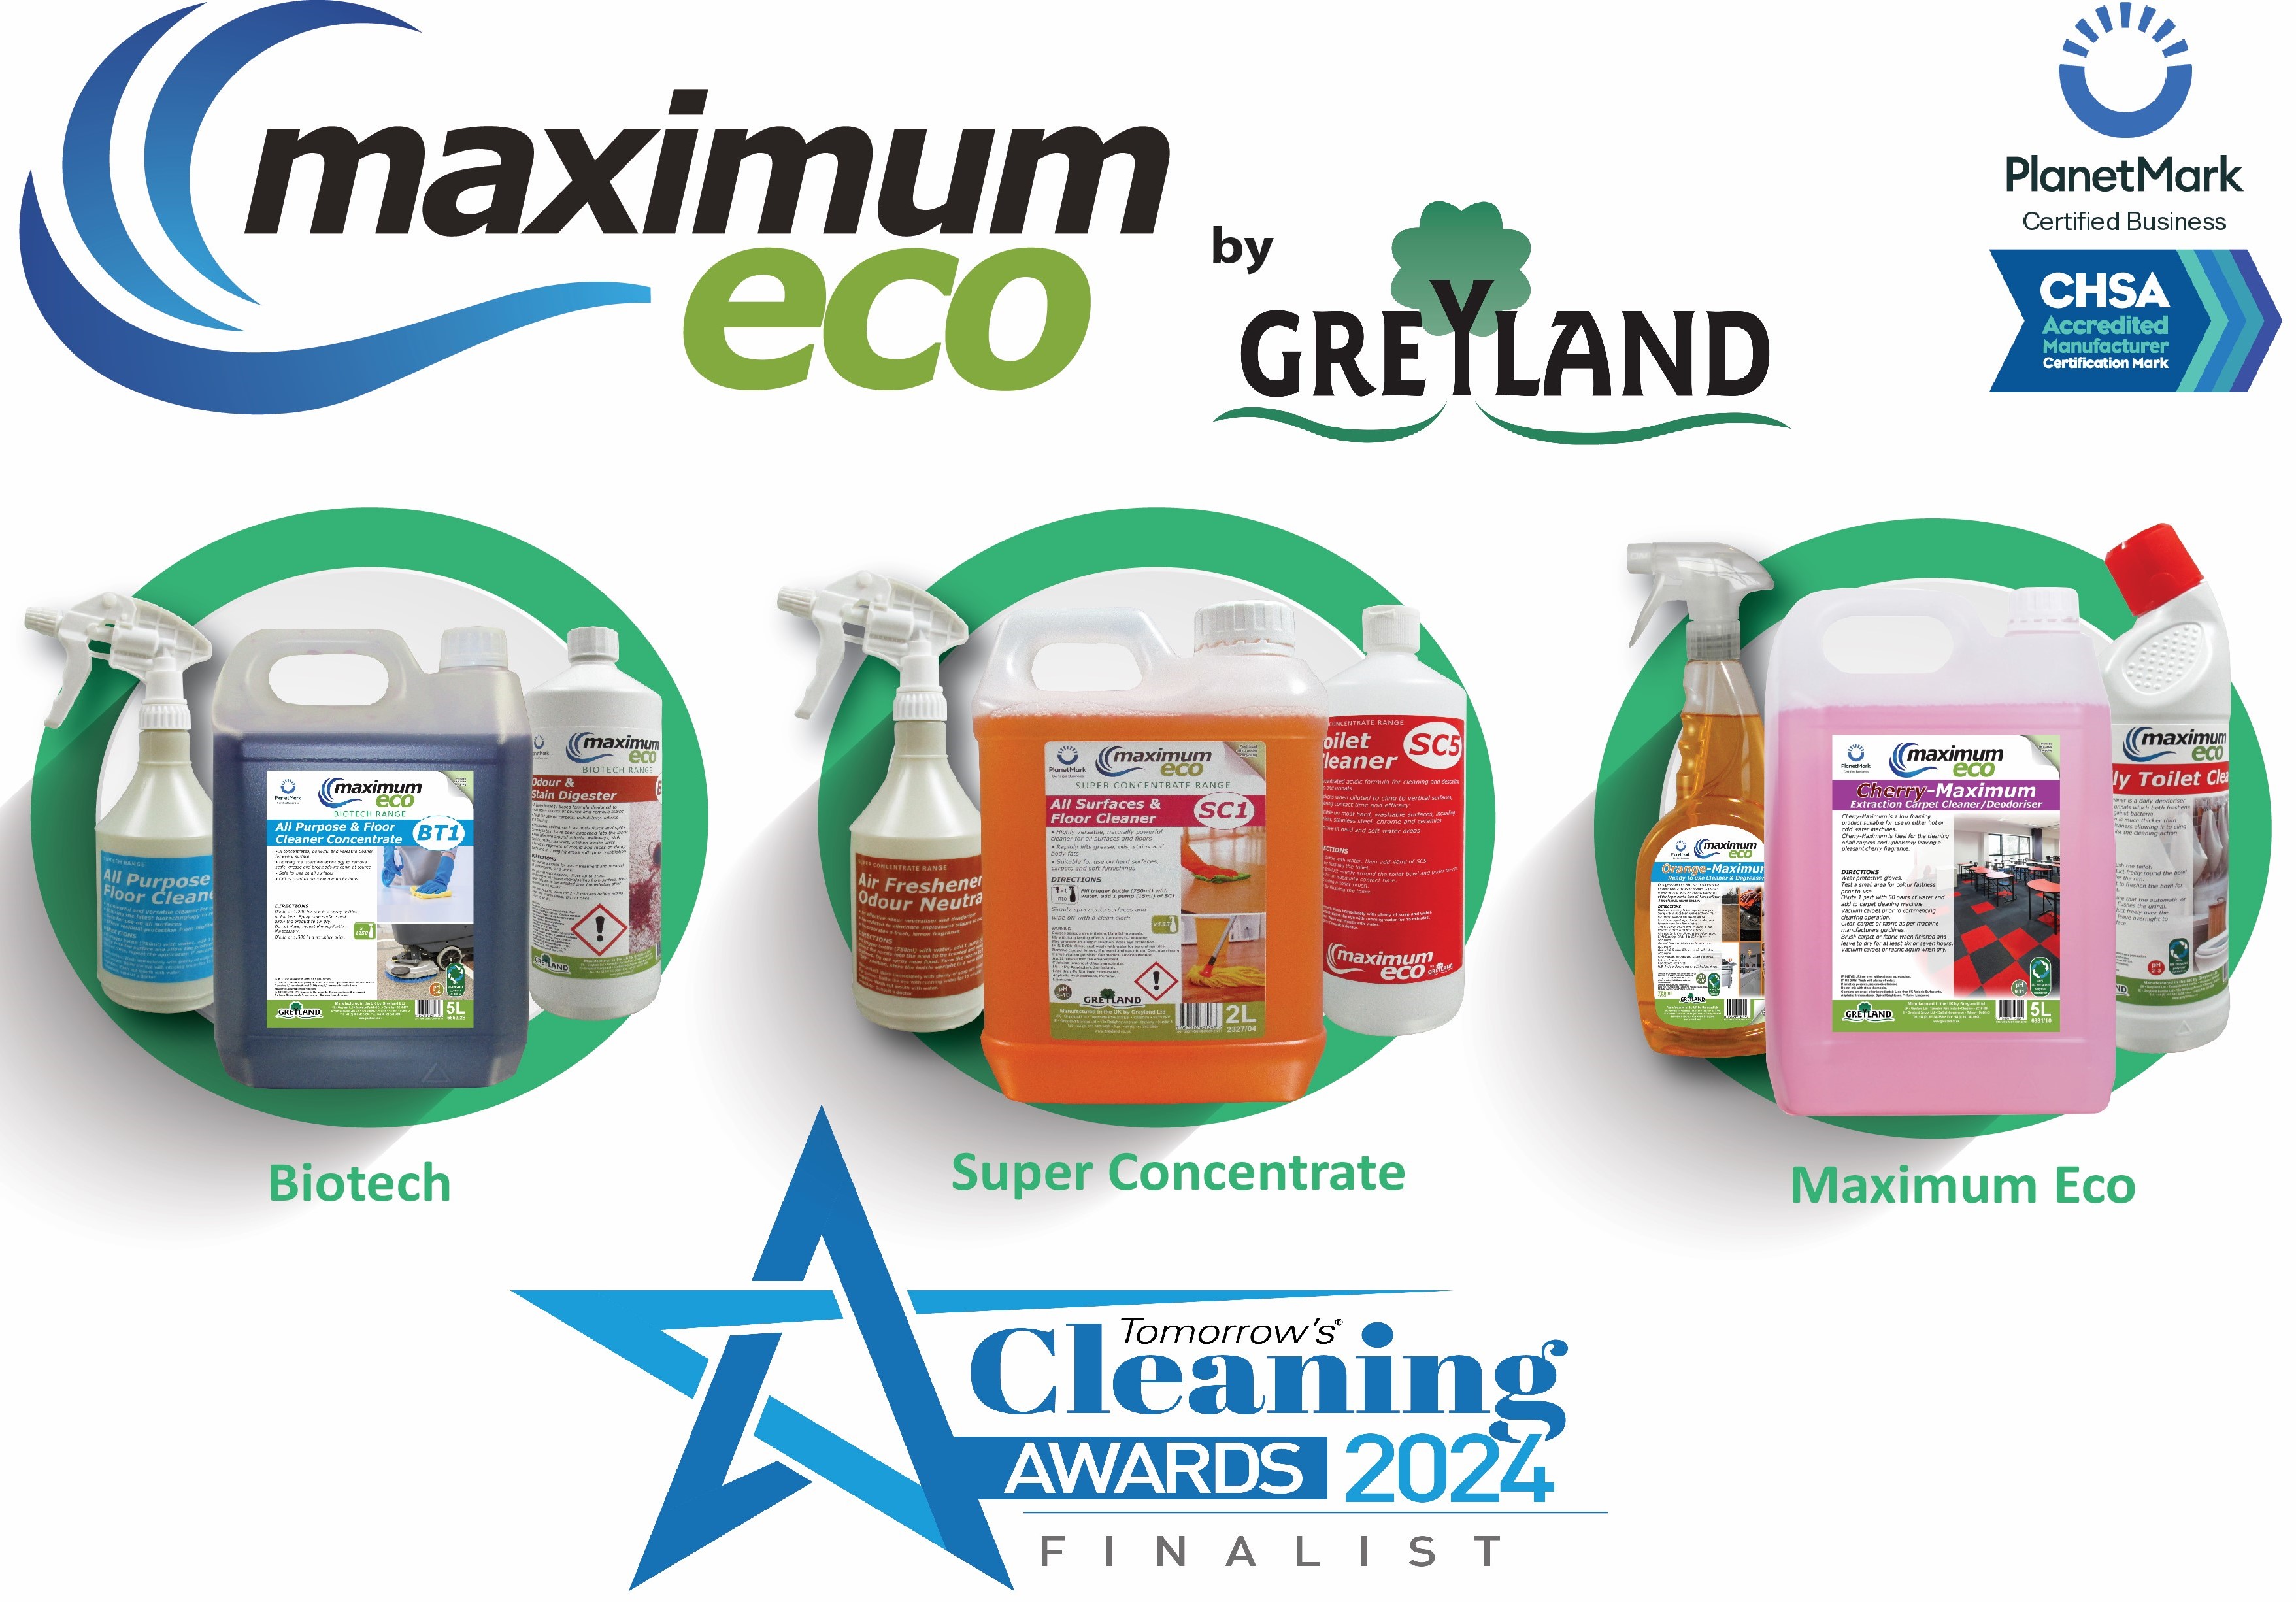 Greyland are Tomorrows Cleaning Awards 2024 Finalists! 